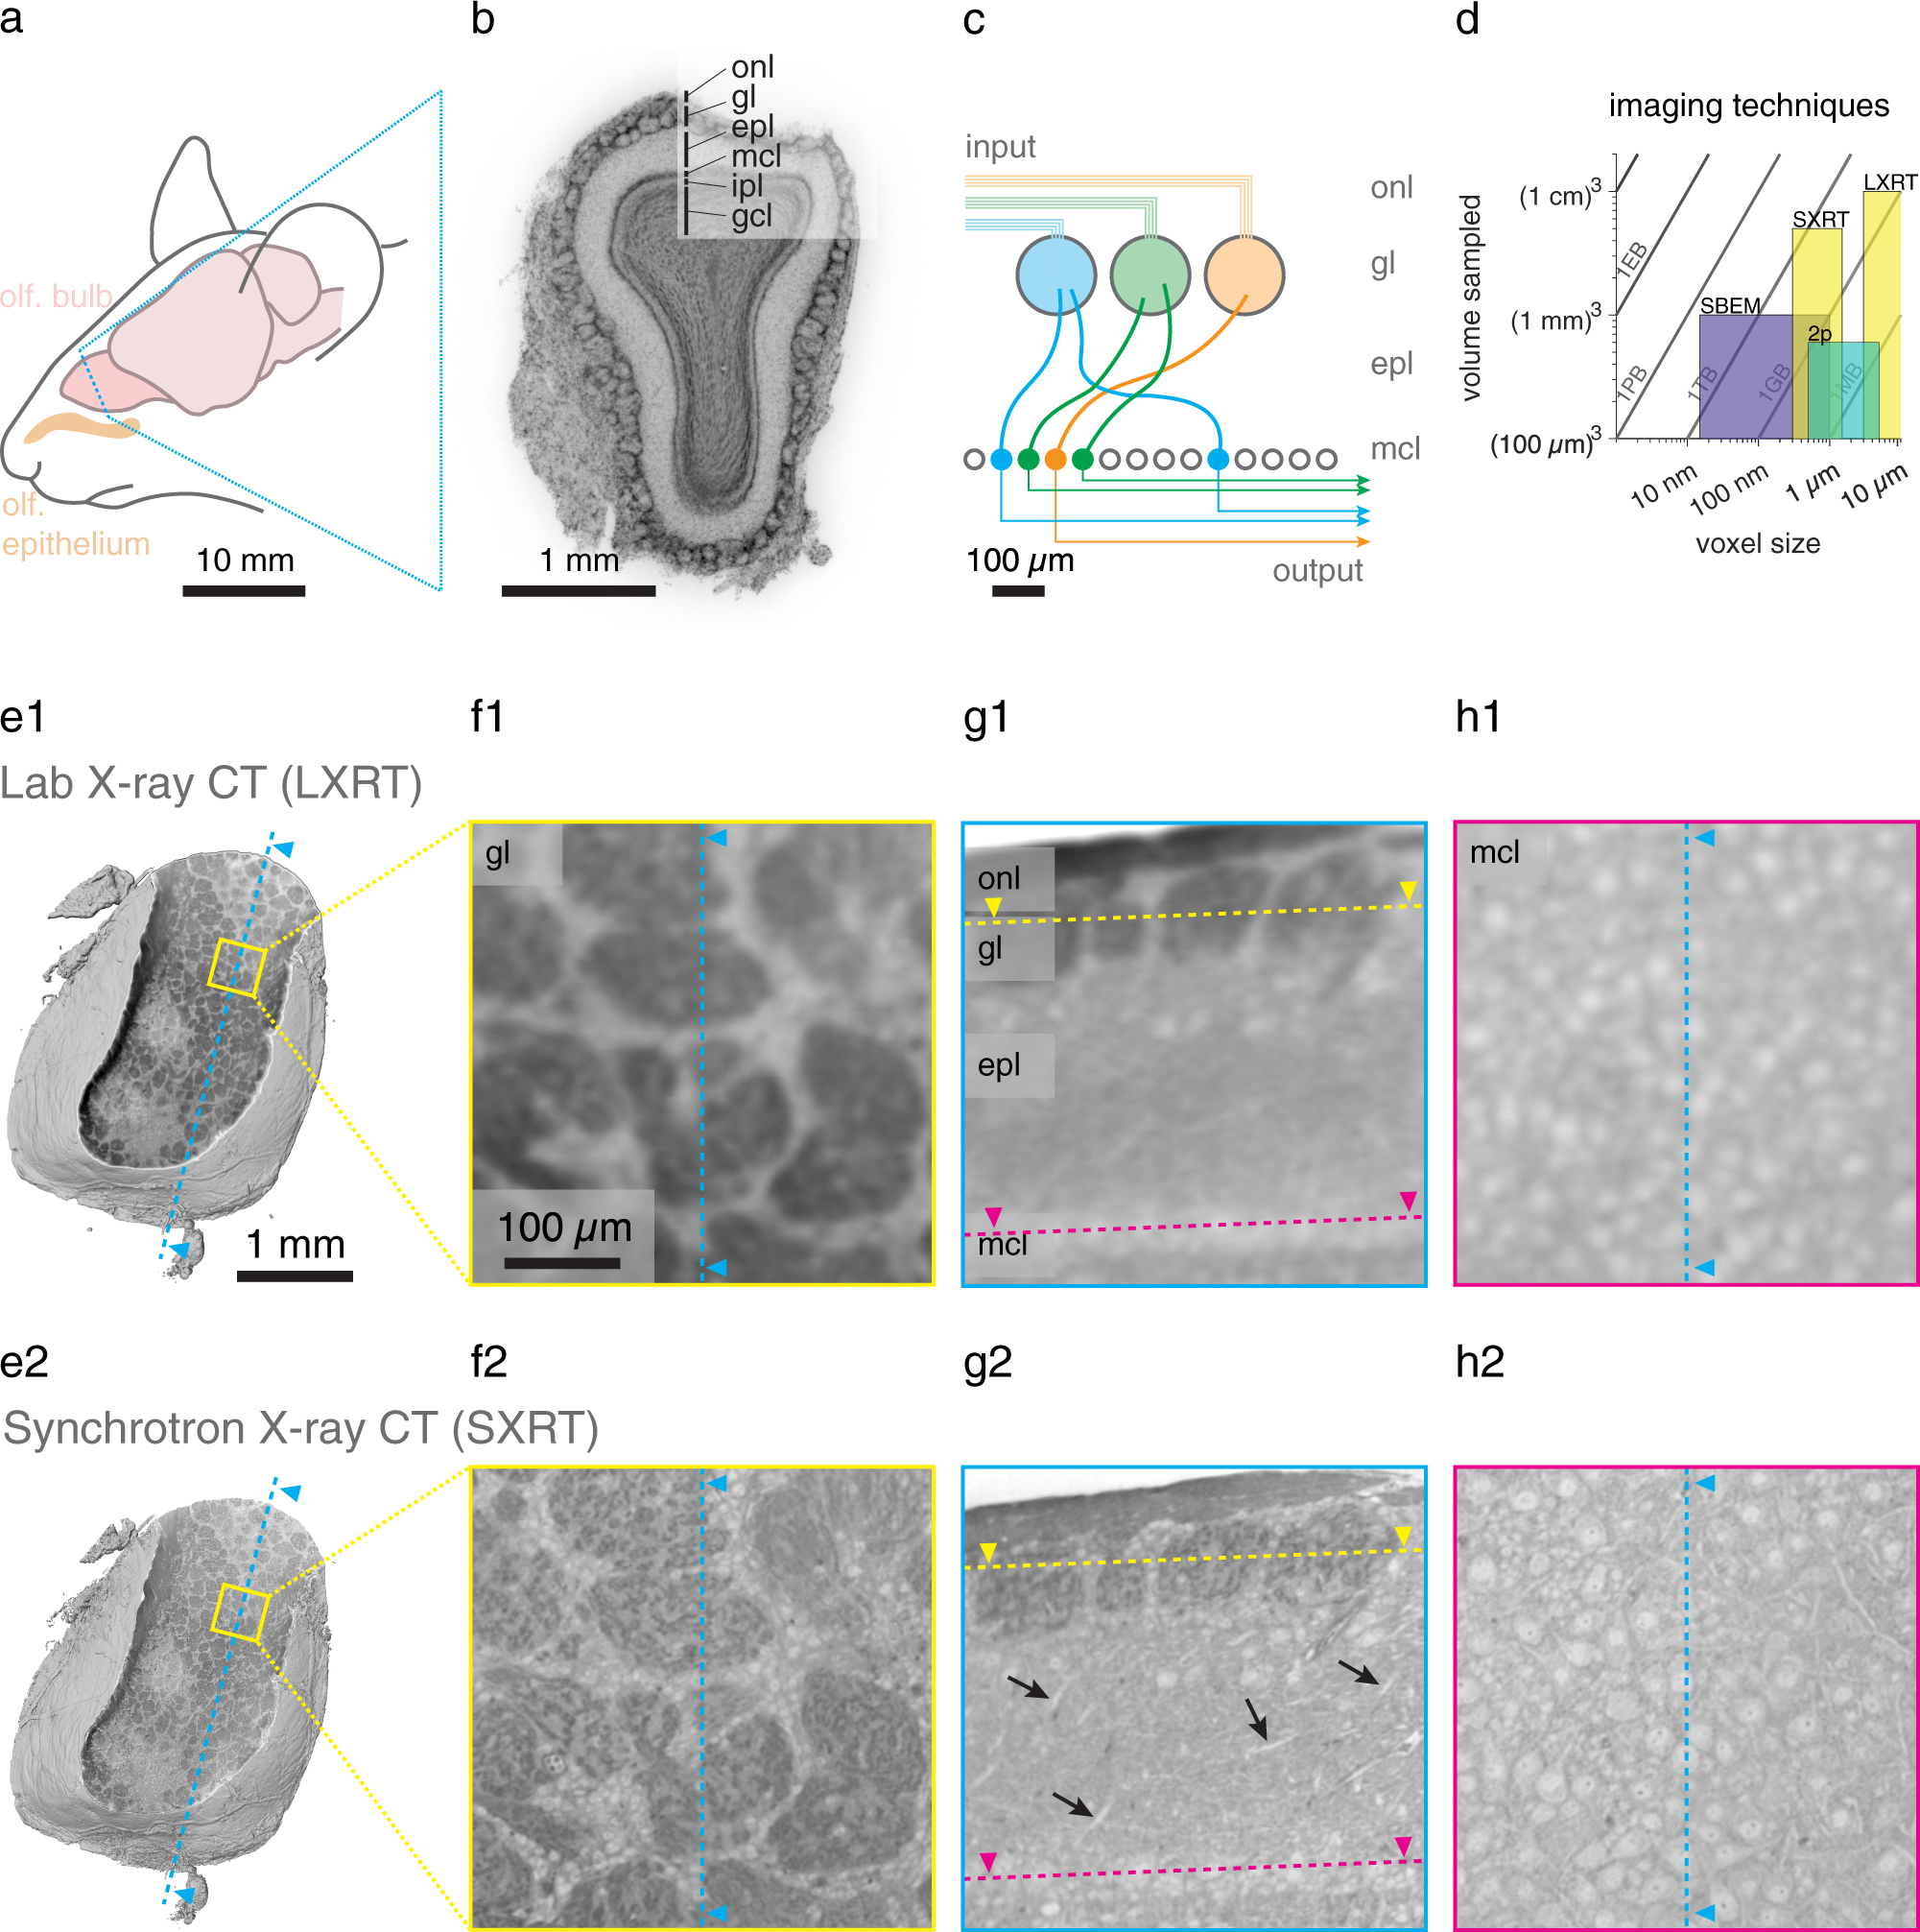 Functional and multiscale 3D structural investigation of brain tissue through correlative in vivo physiology, synchrotron microtomography and volume electron microscopy Nature Communications